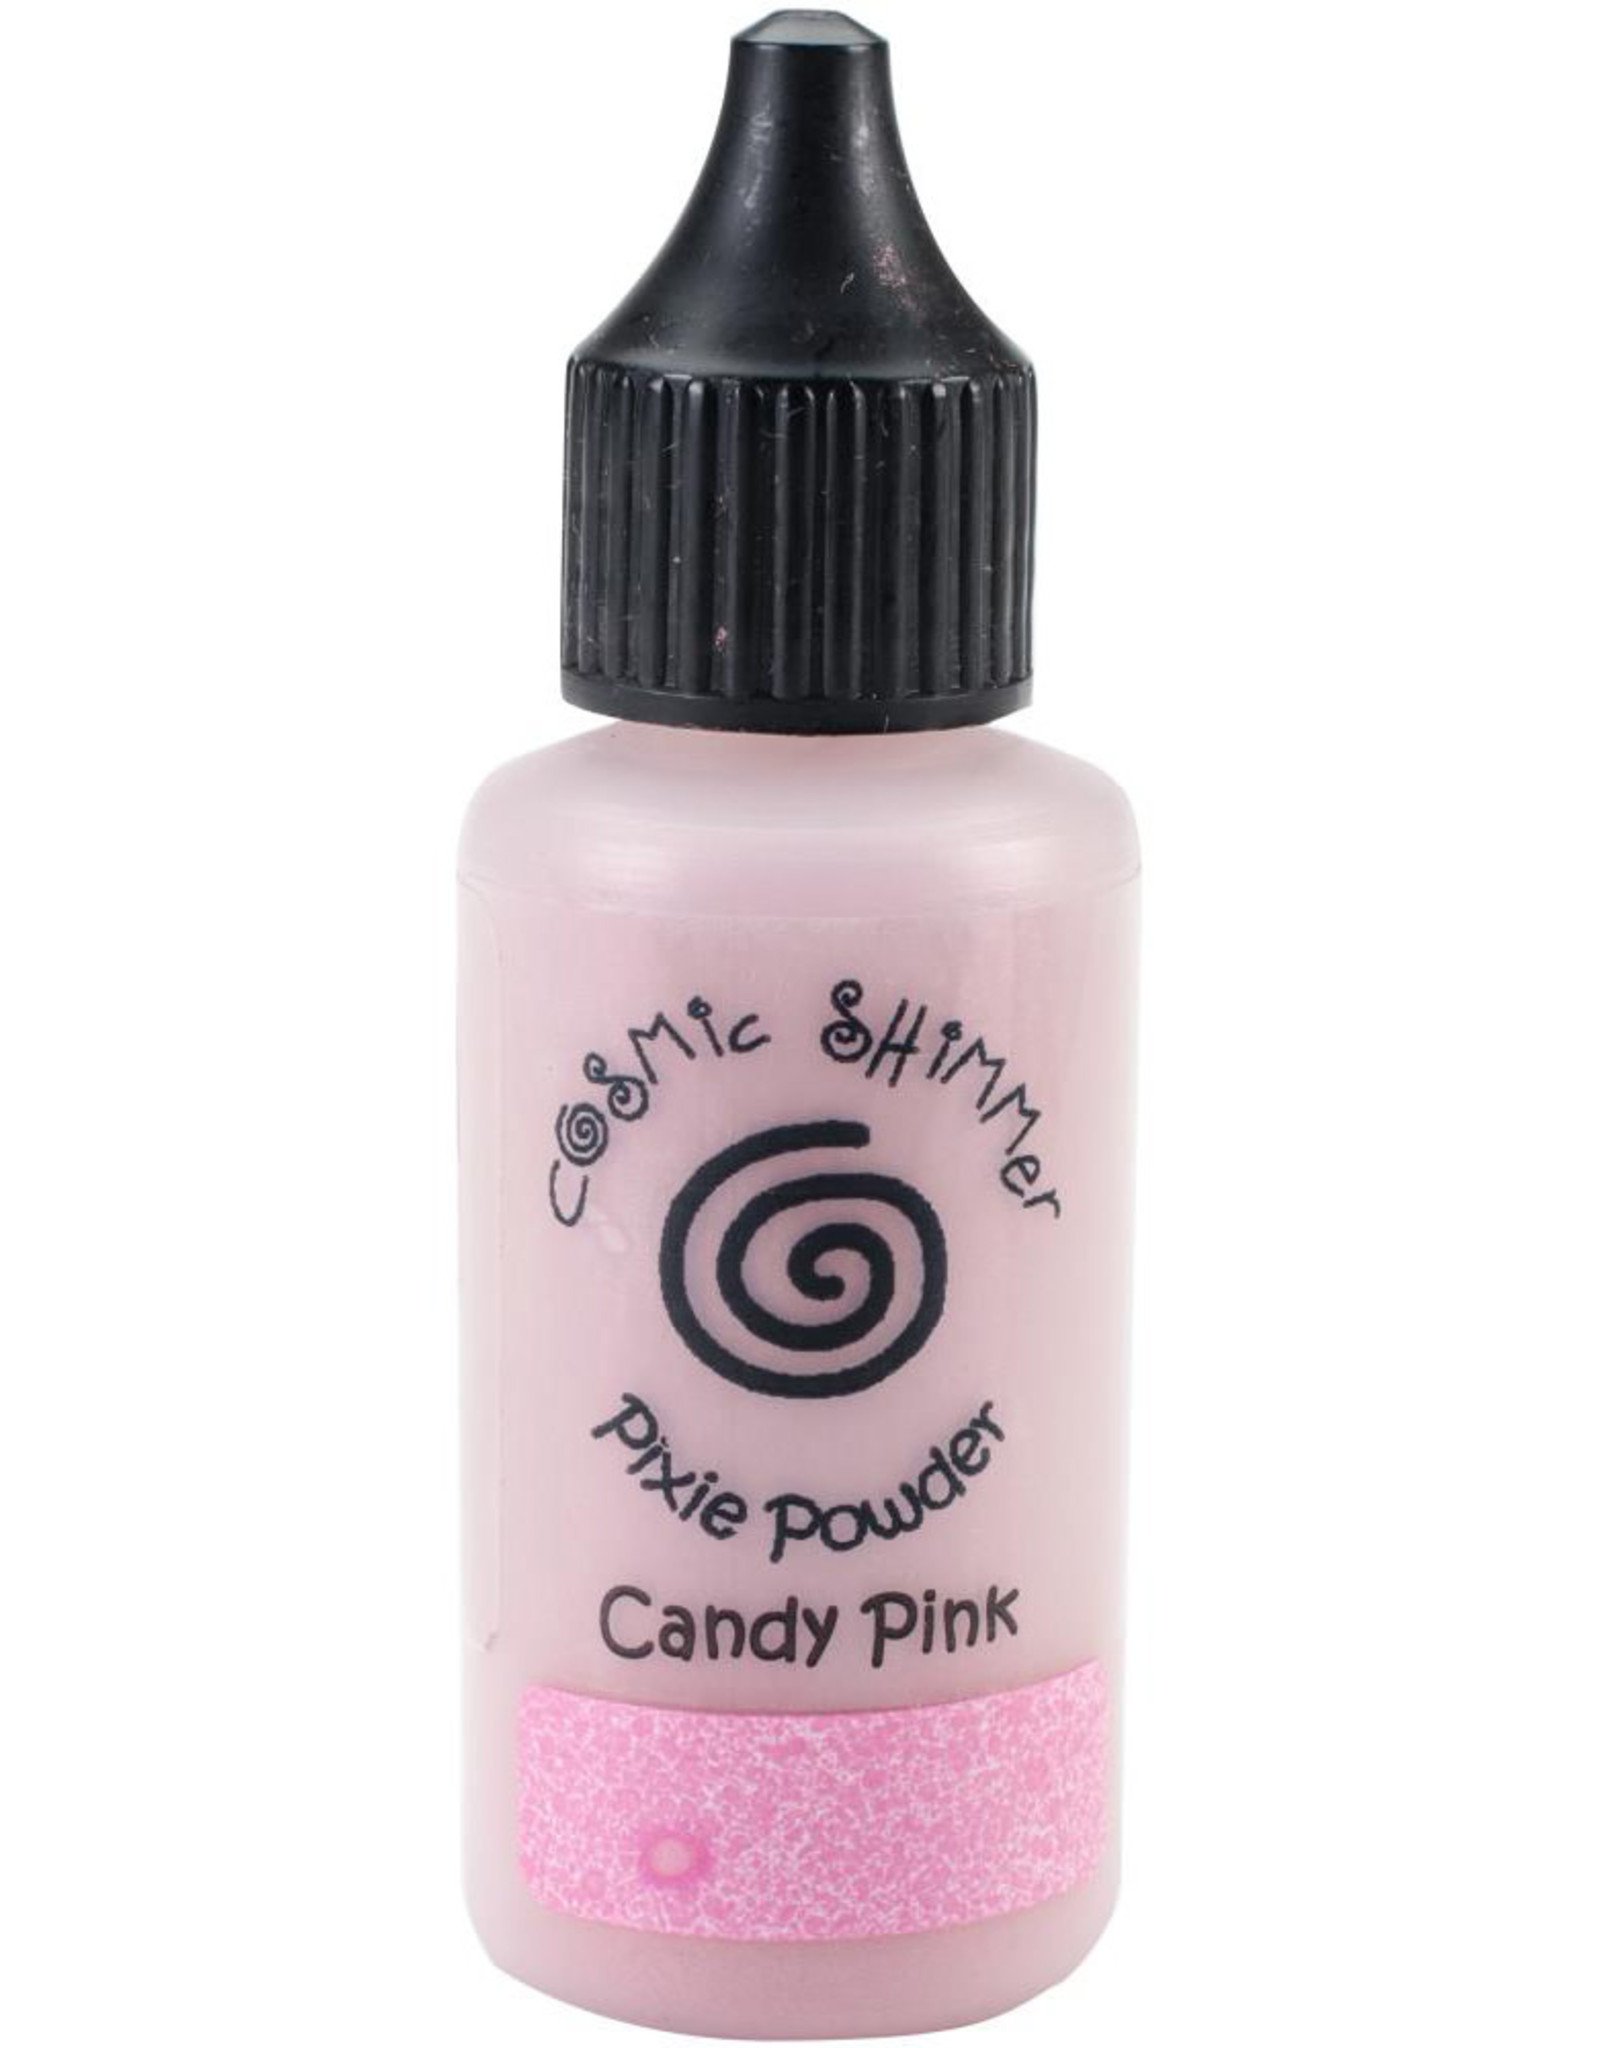 CREATIVE EXPRESSIONS CREATIVE EXPRESSIONS COSMIC SHIMMER PIXIE POWDER CANDY PINK